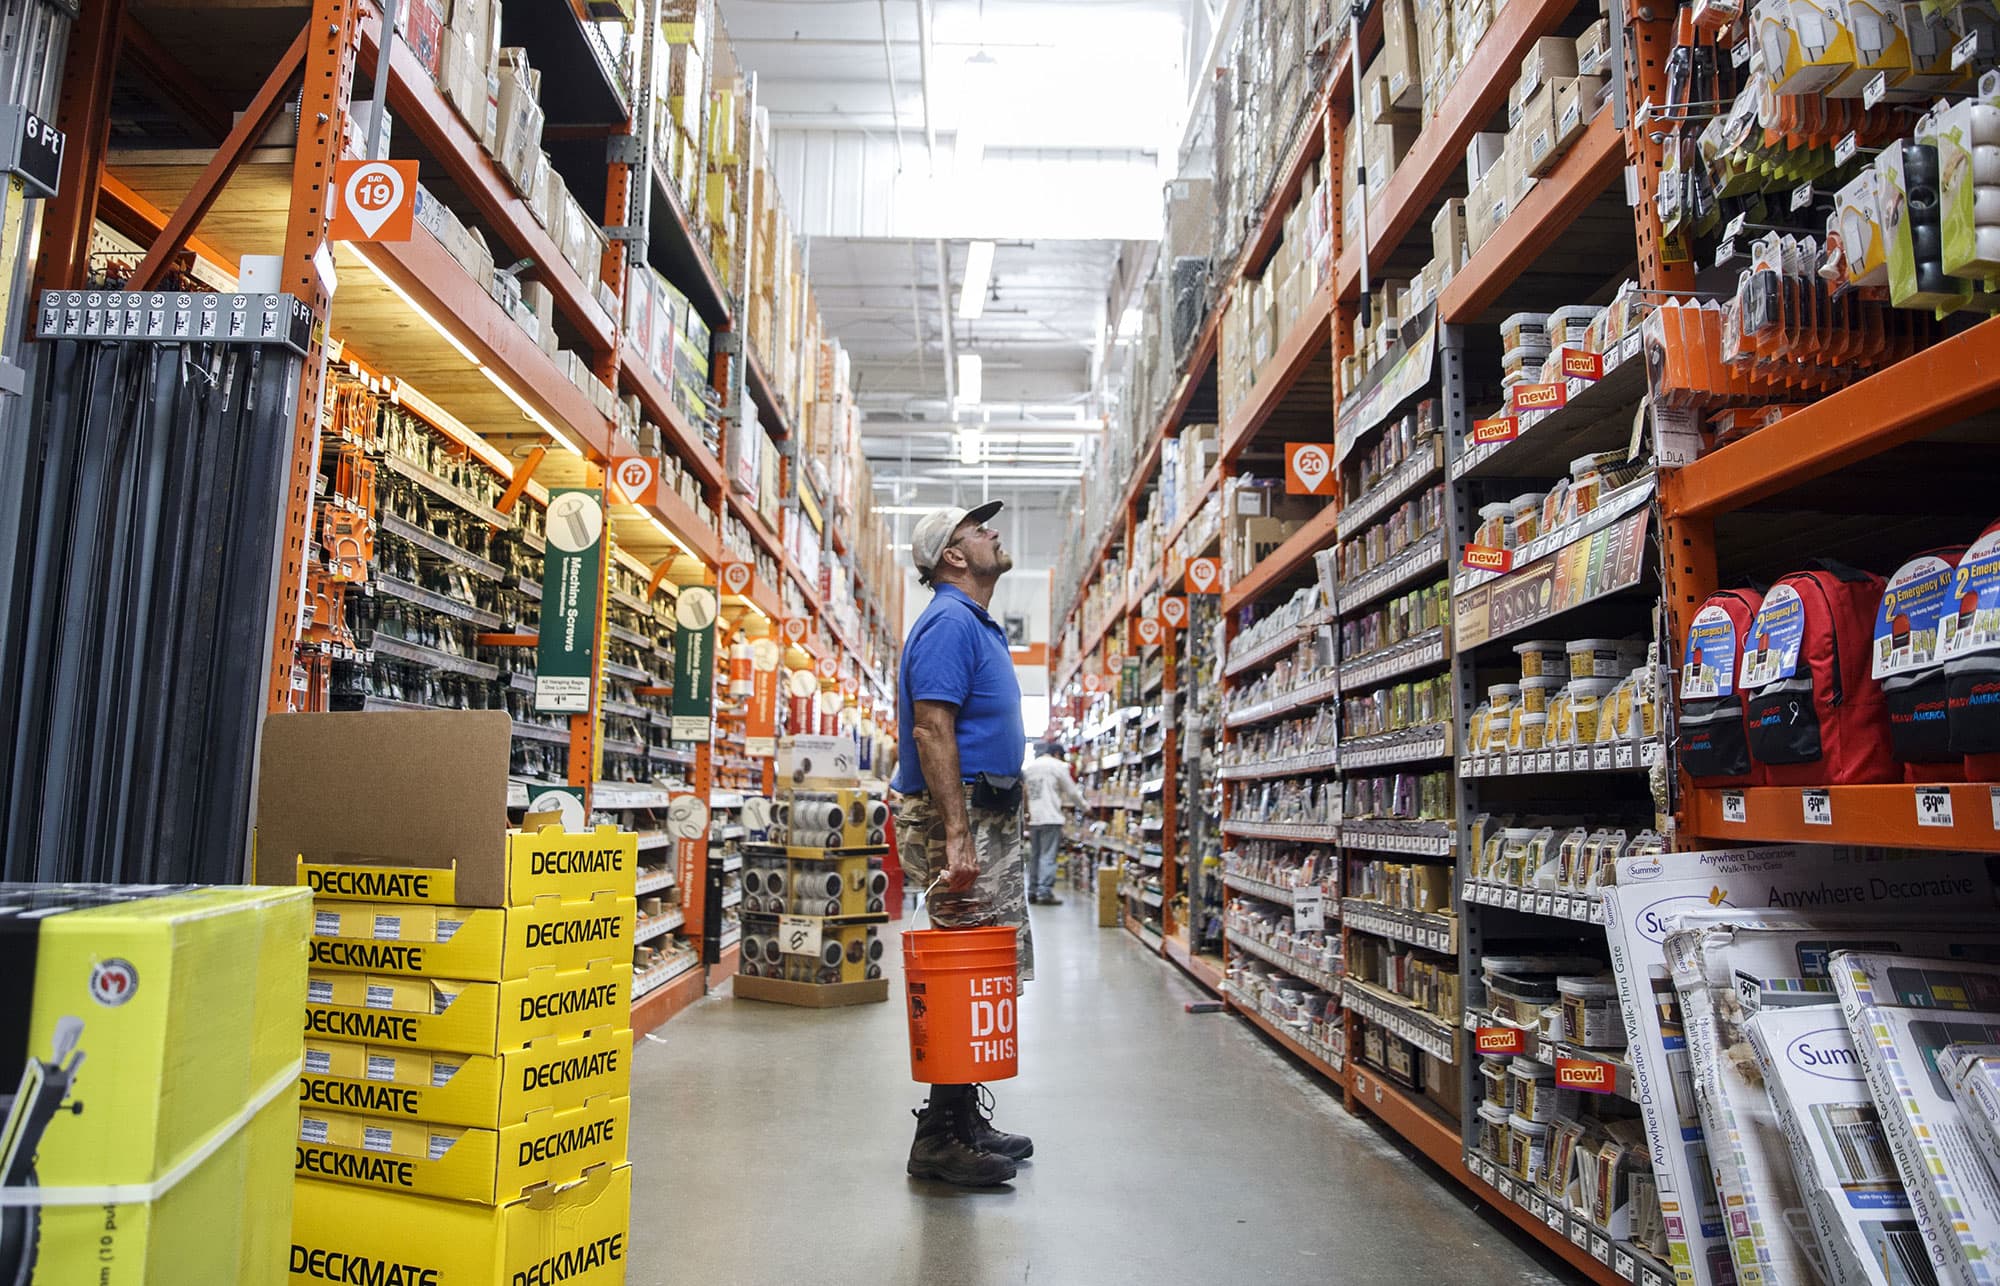 Home Depot says suppliers are moving manufacturing out of China